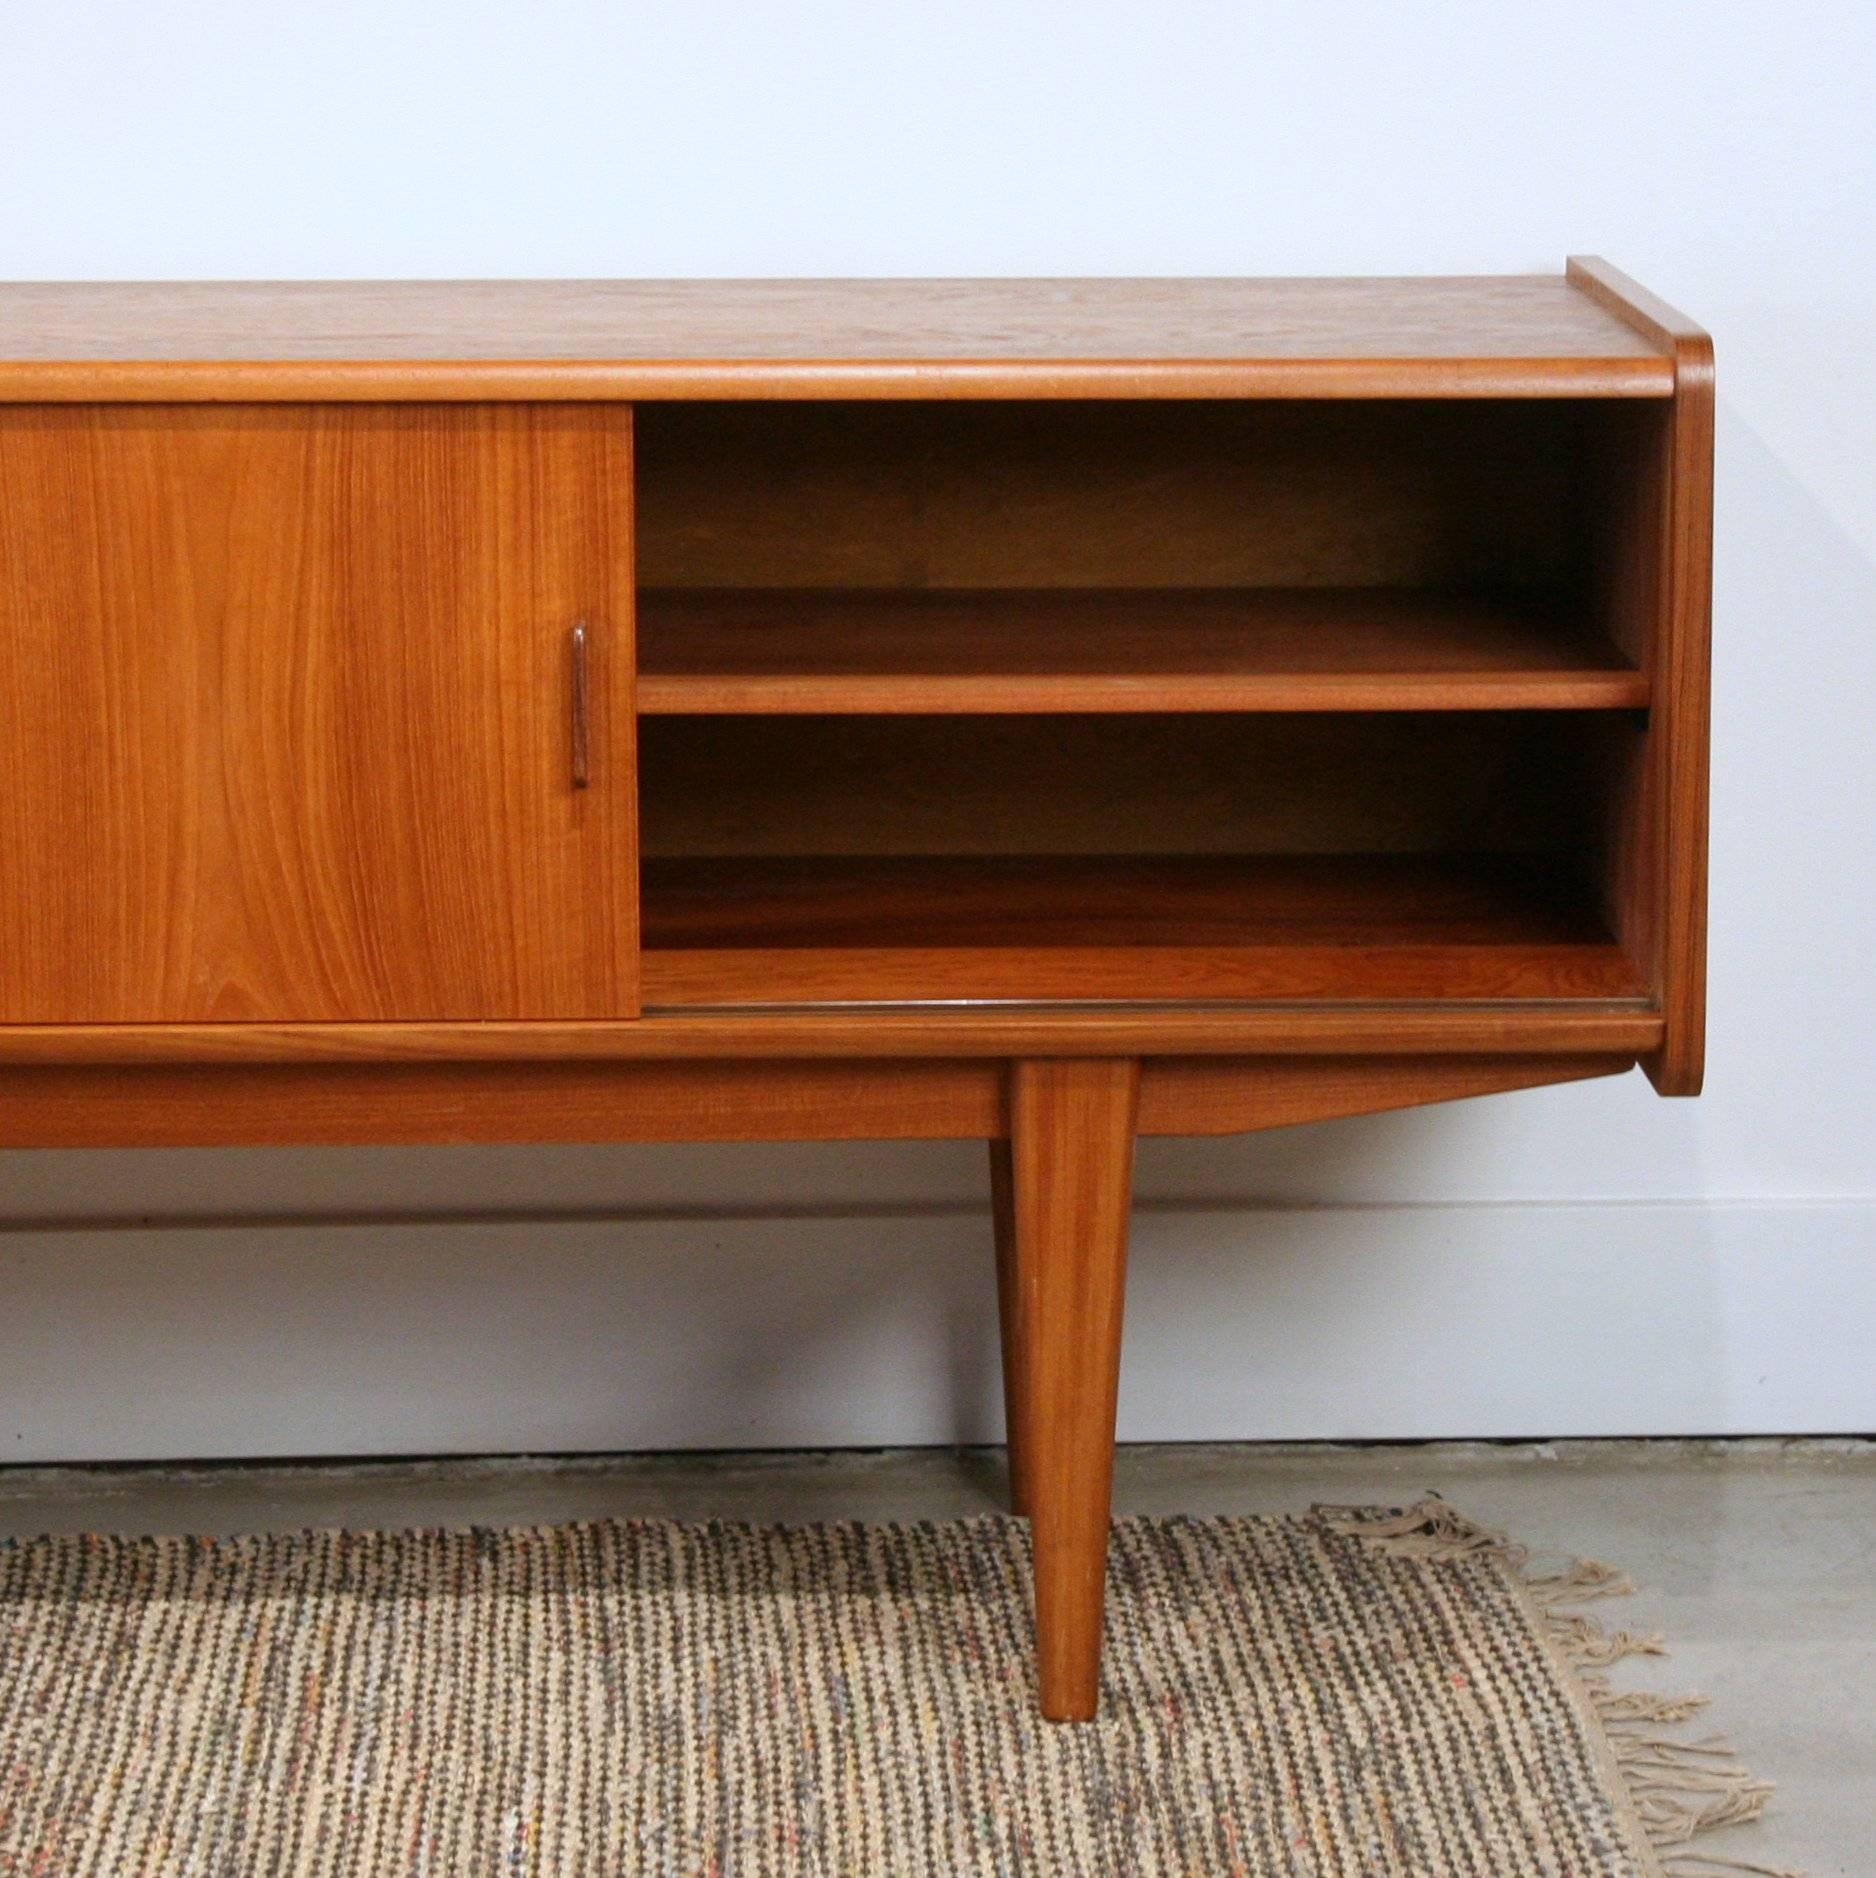 Stunning long vintage Danish teak sideboard with centre bank of drawers. Solid rounded front edging with solid thin, angled teak pulls. Resting on solid tapered teak legs. Sliding doors opening to reveal a removable shelf. Made in Denmark.
     